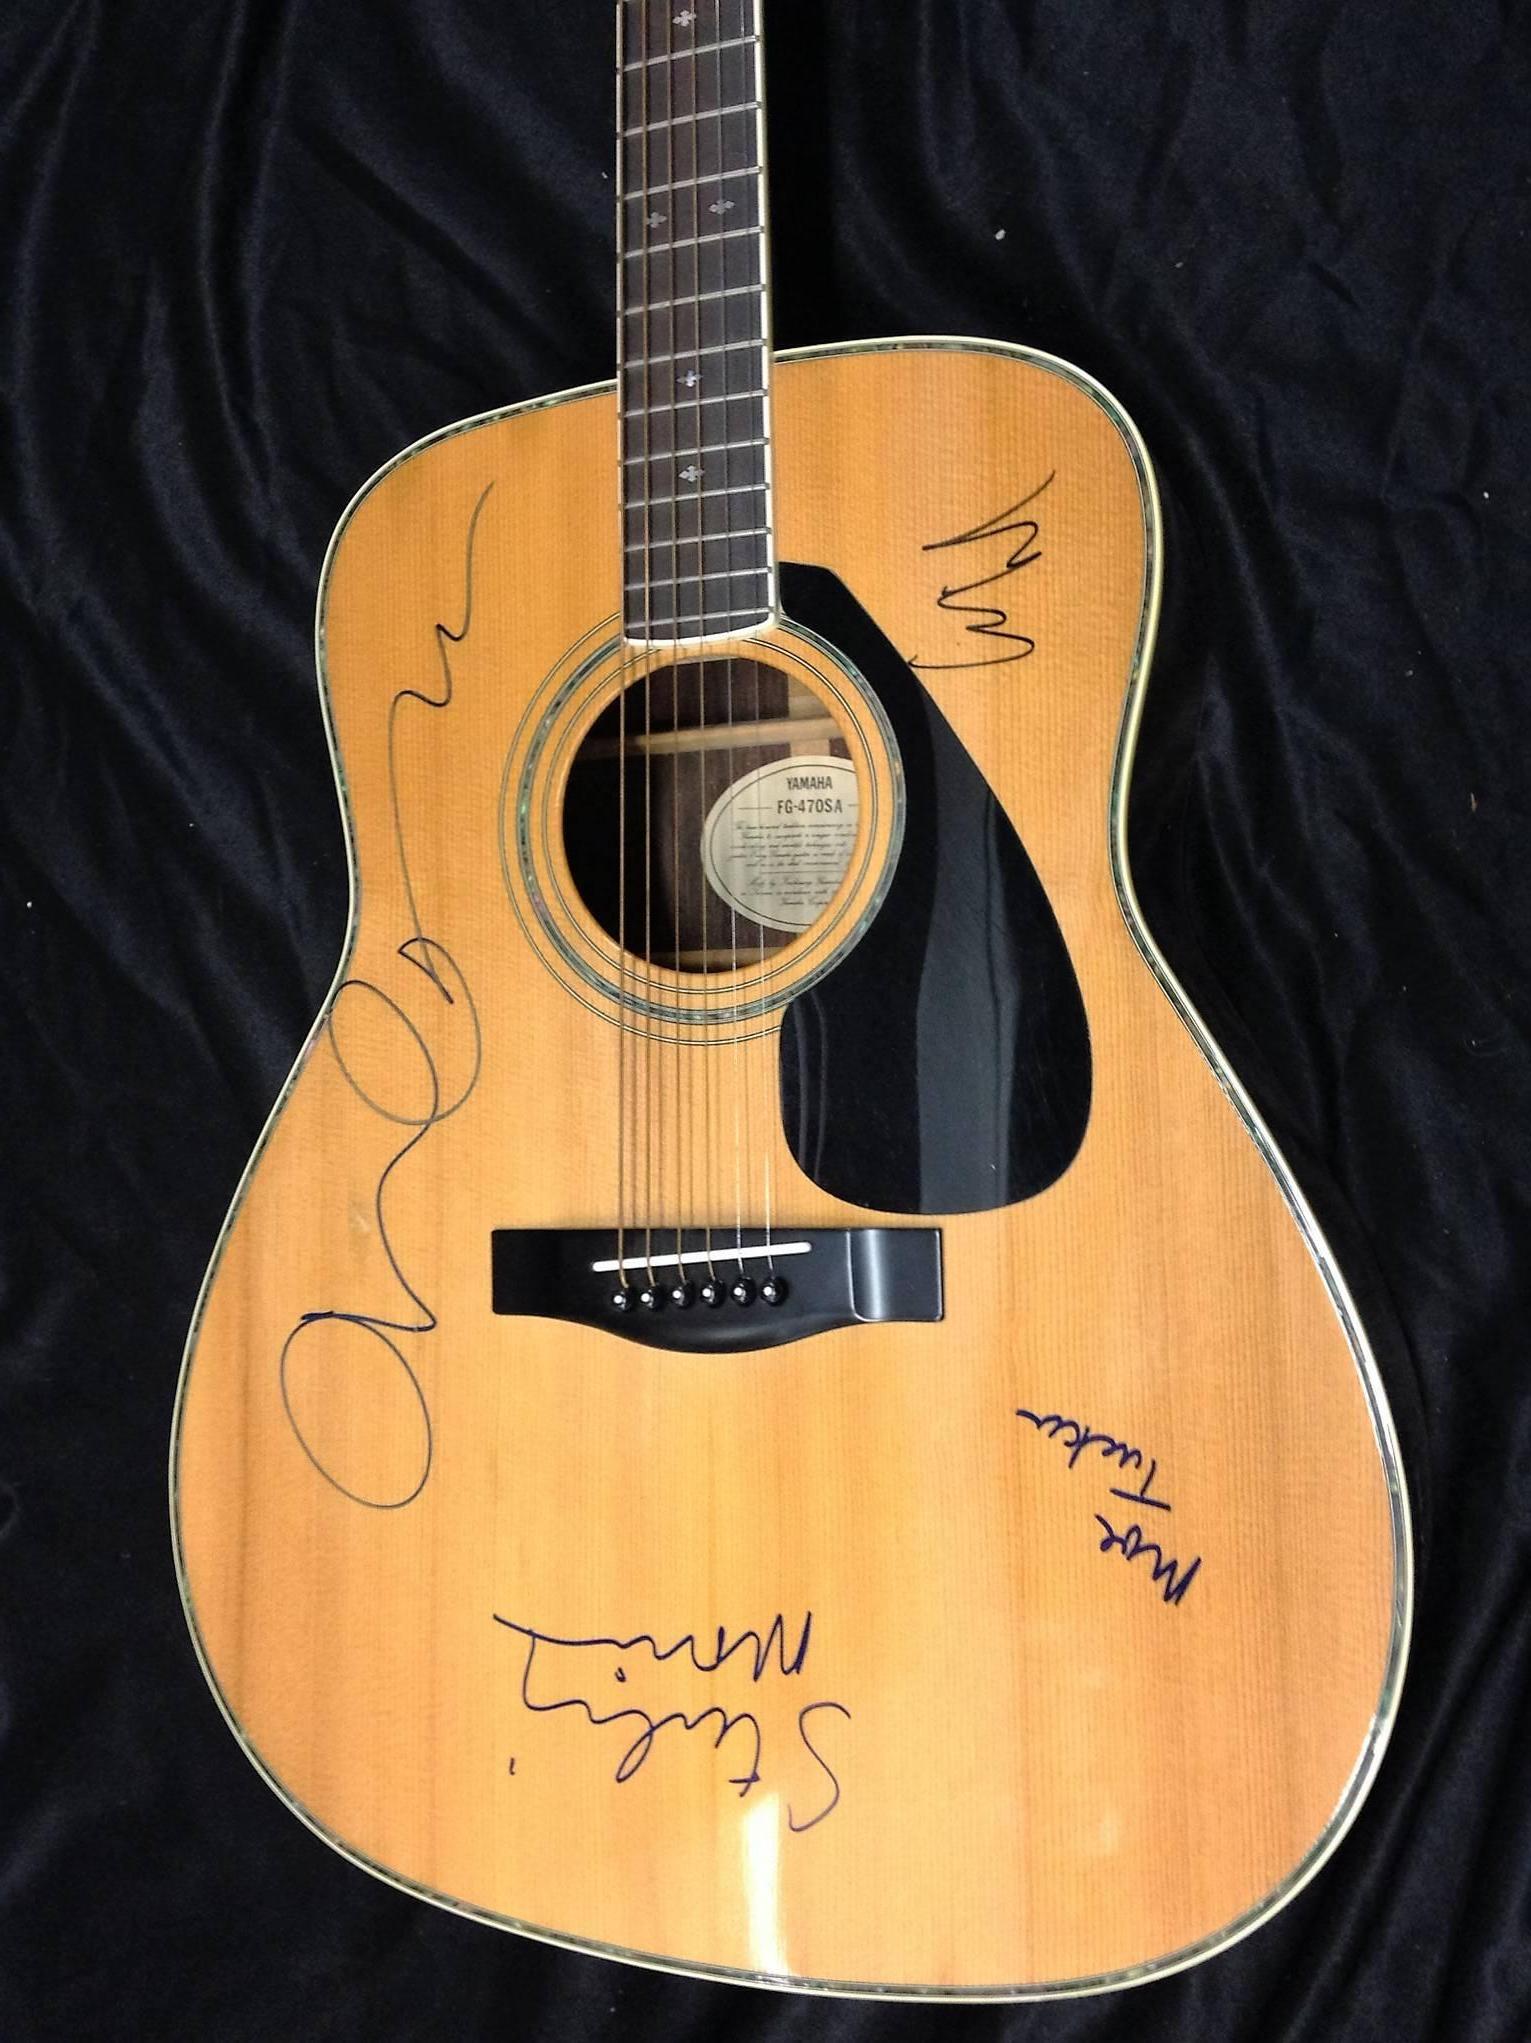 Autographed Velvet Underground Guitar In Good Condition For Sale In Mount Penn, PA